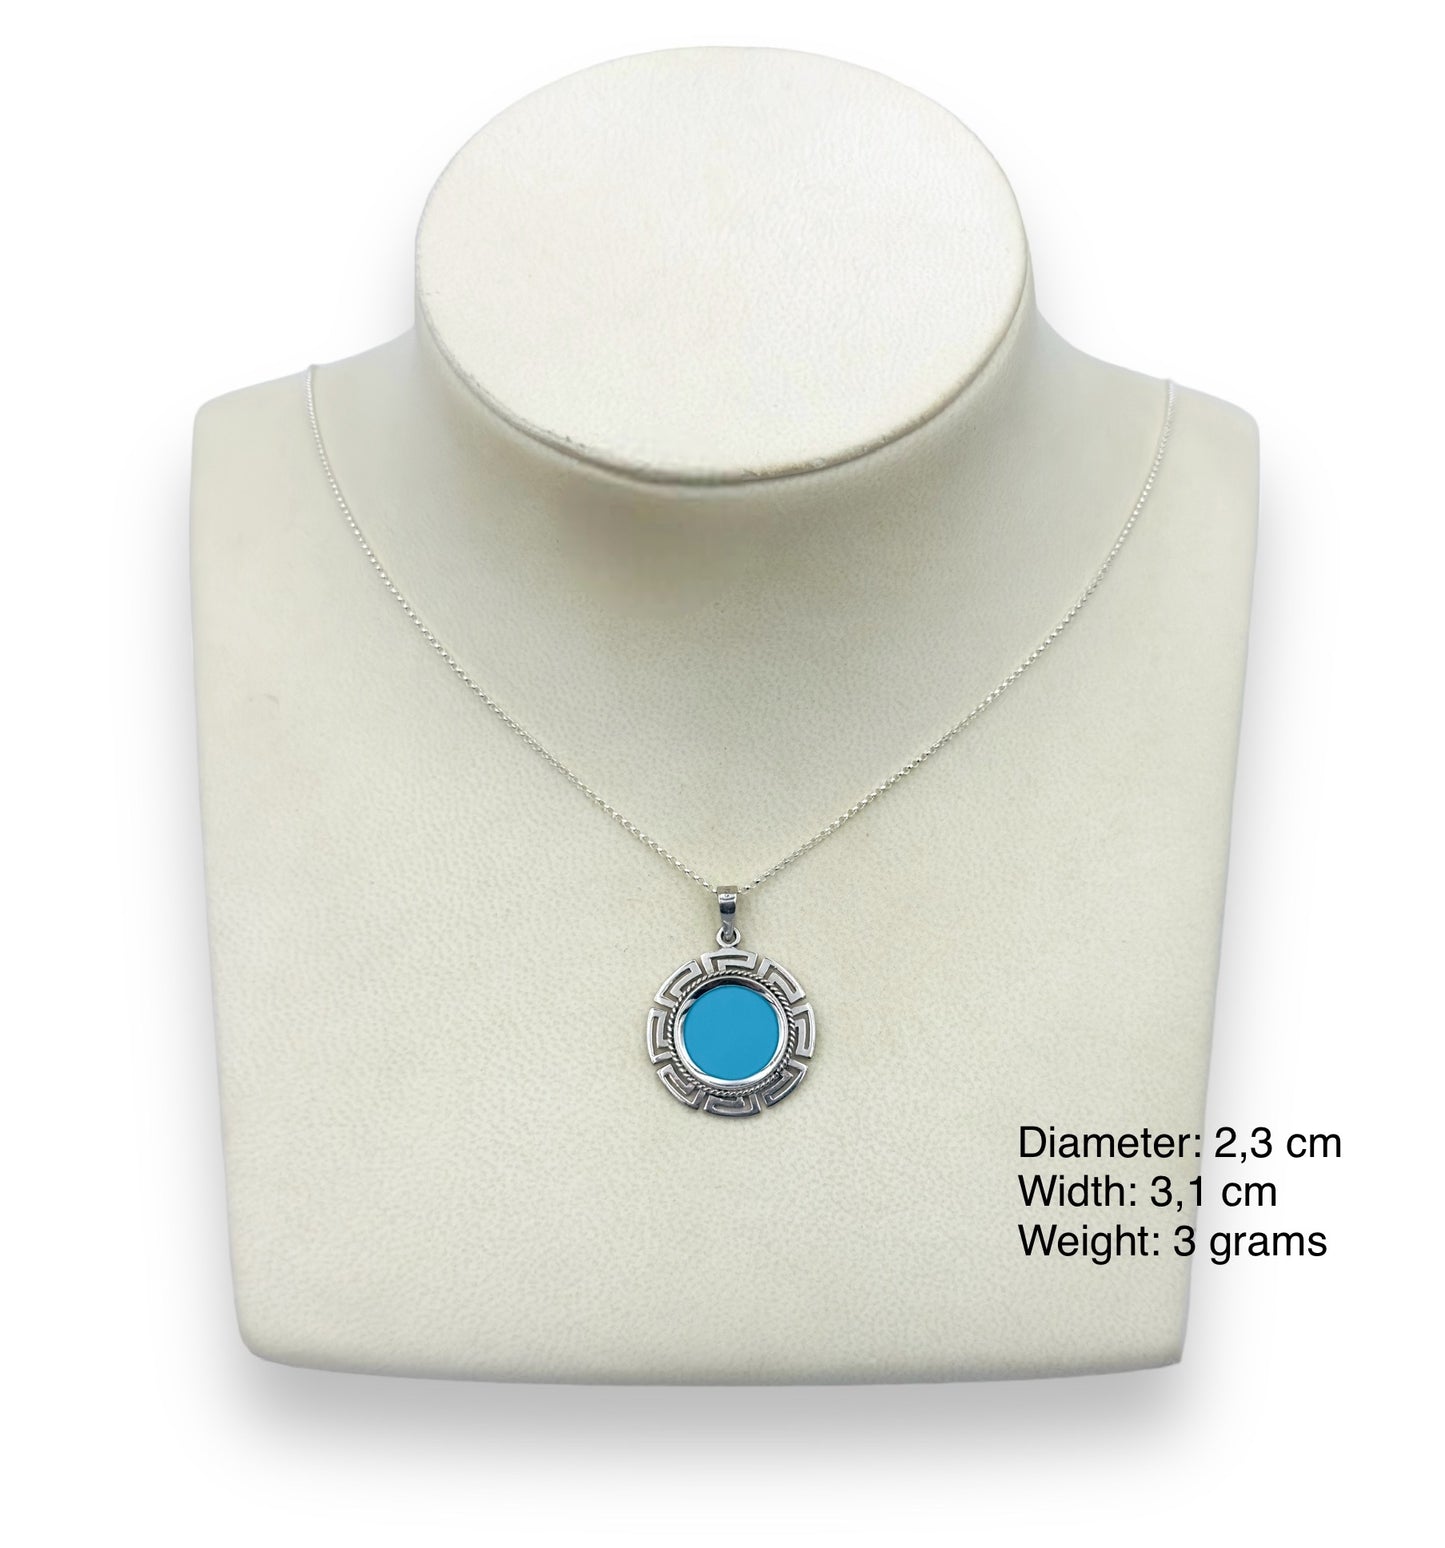 Silver Meander design pendant with Turquoise stone